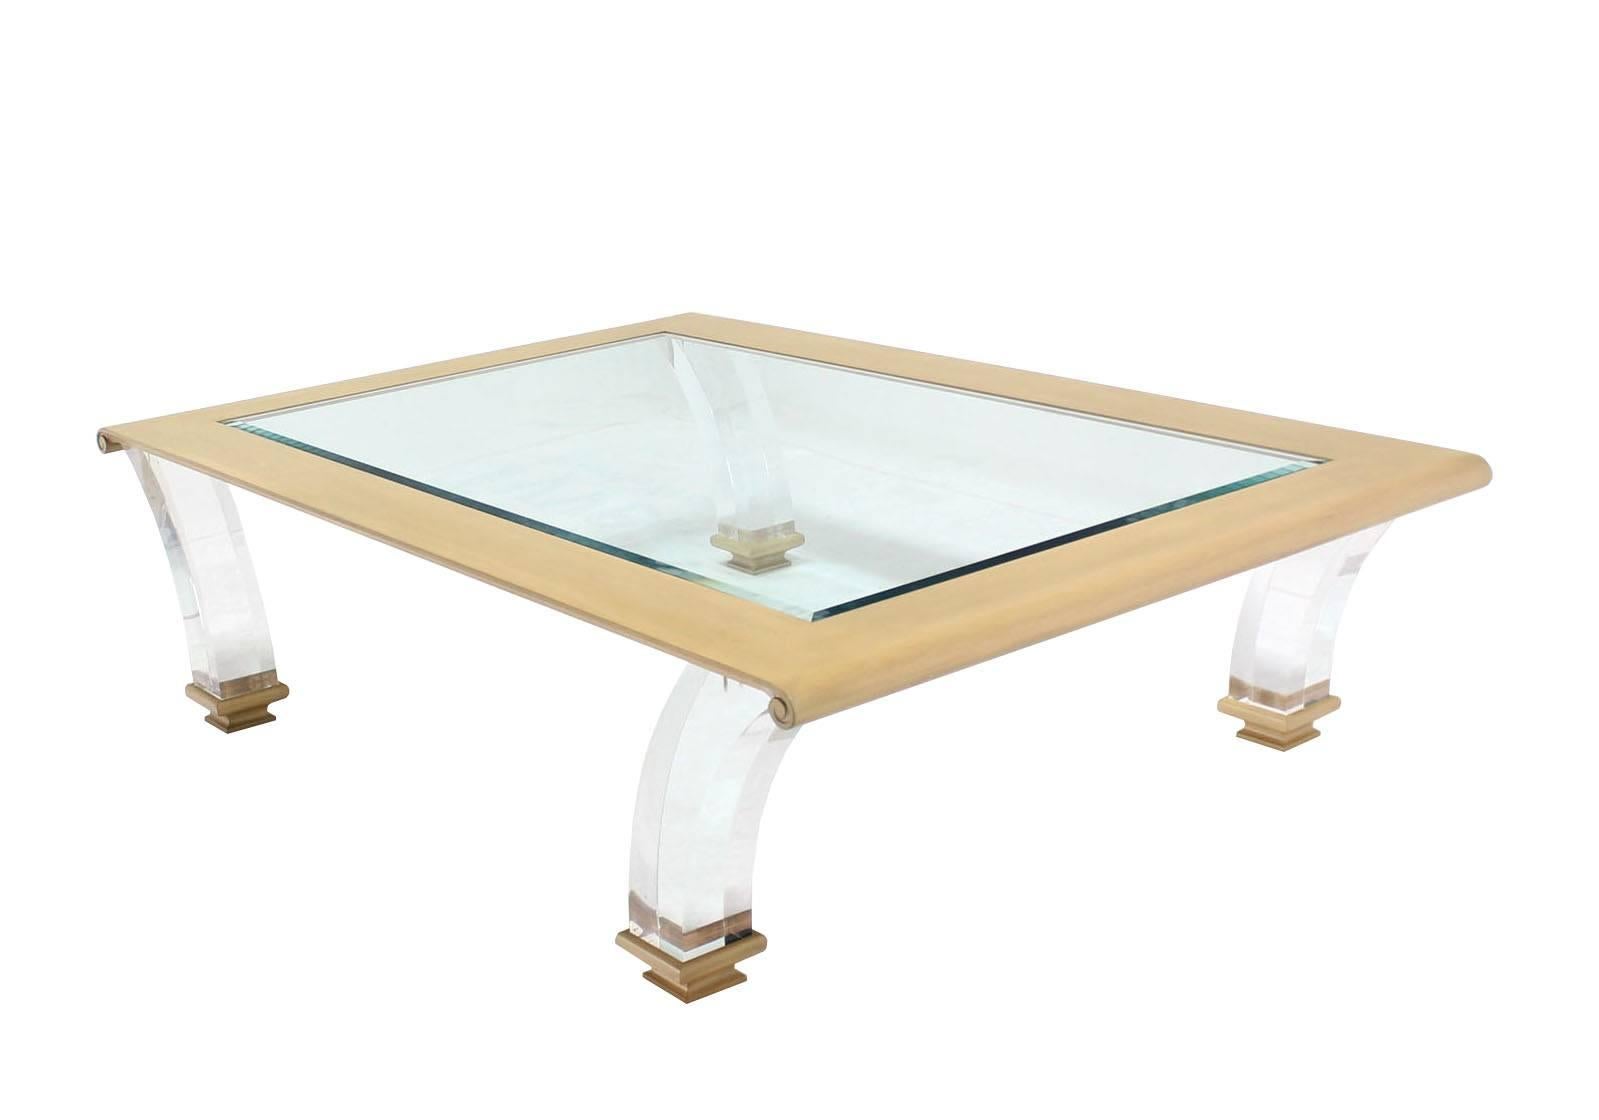 Very elegant looking custom mid century modern style large coffee table on lucite legs. Nice 3/4" thick glass top.